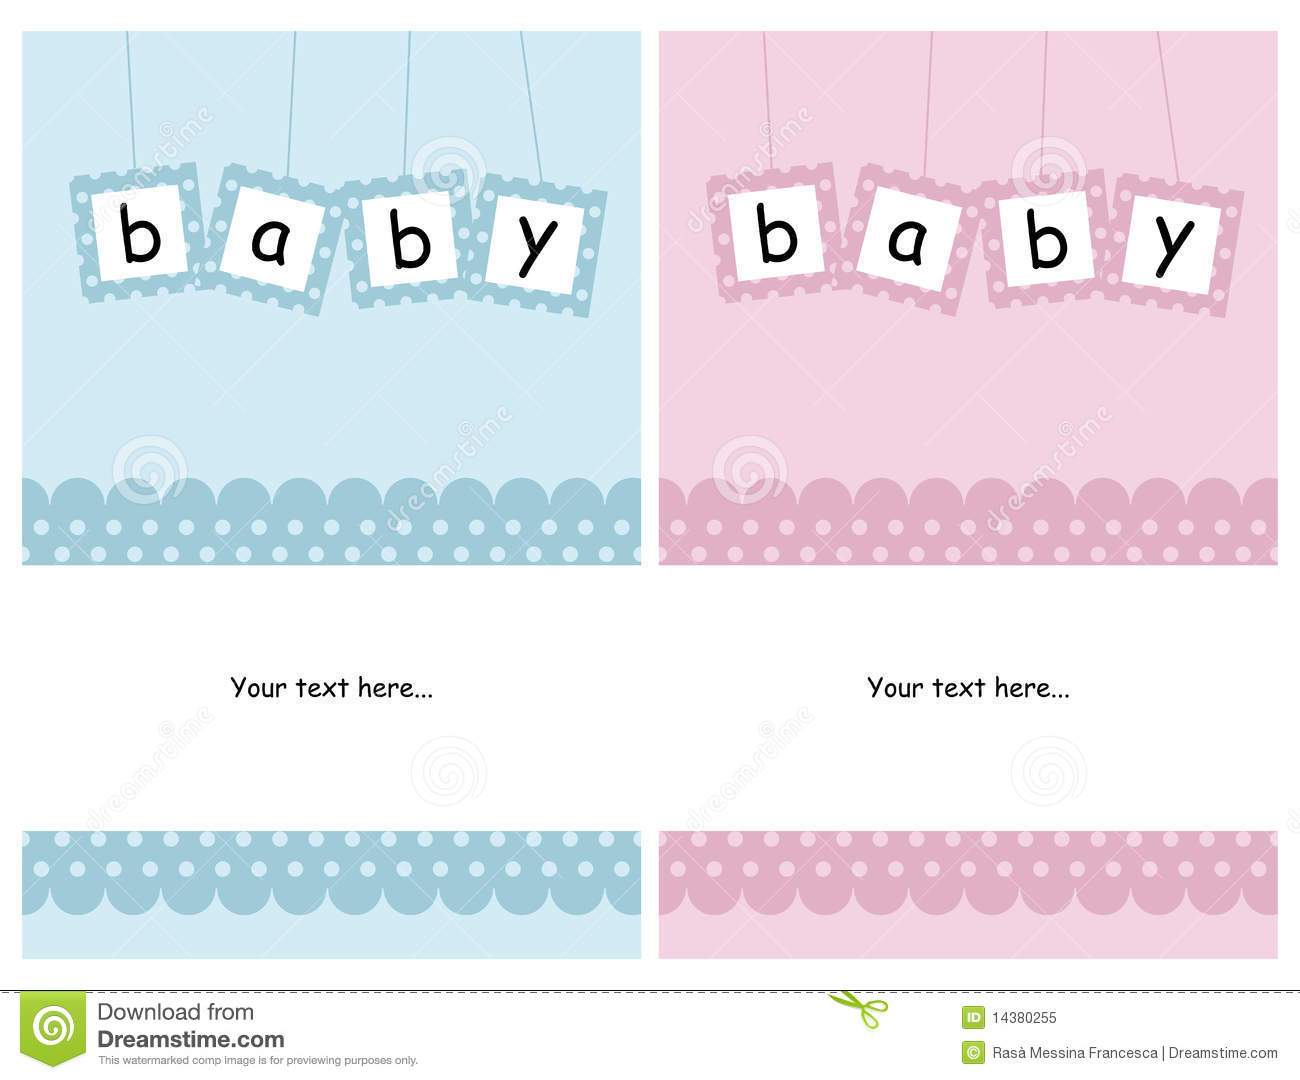 6-best-images-of-baby-gift-free-printable-cards-free-printable-baby